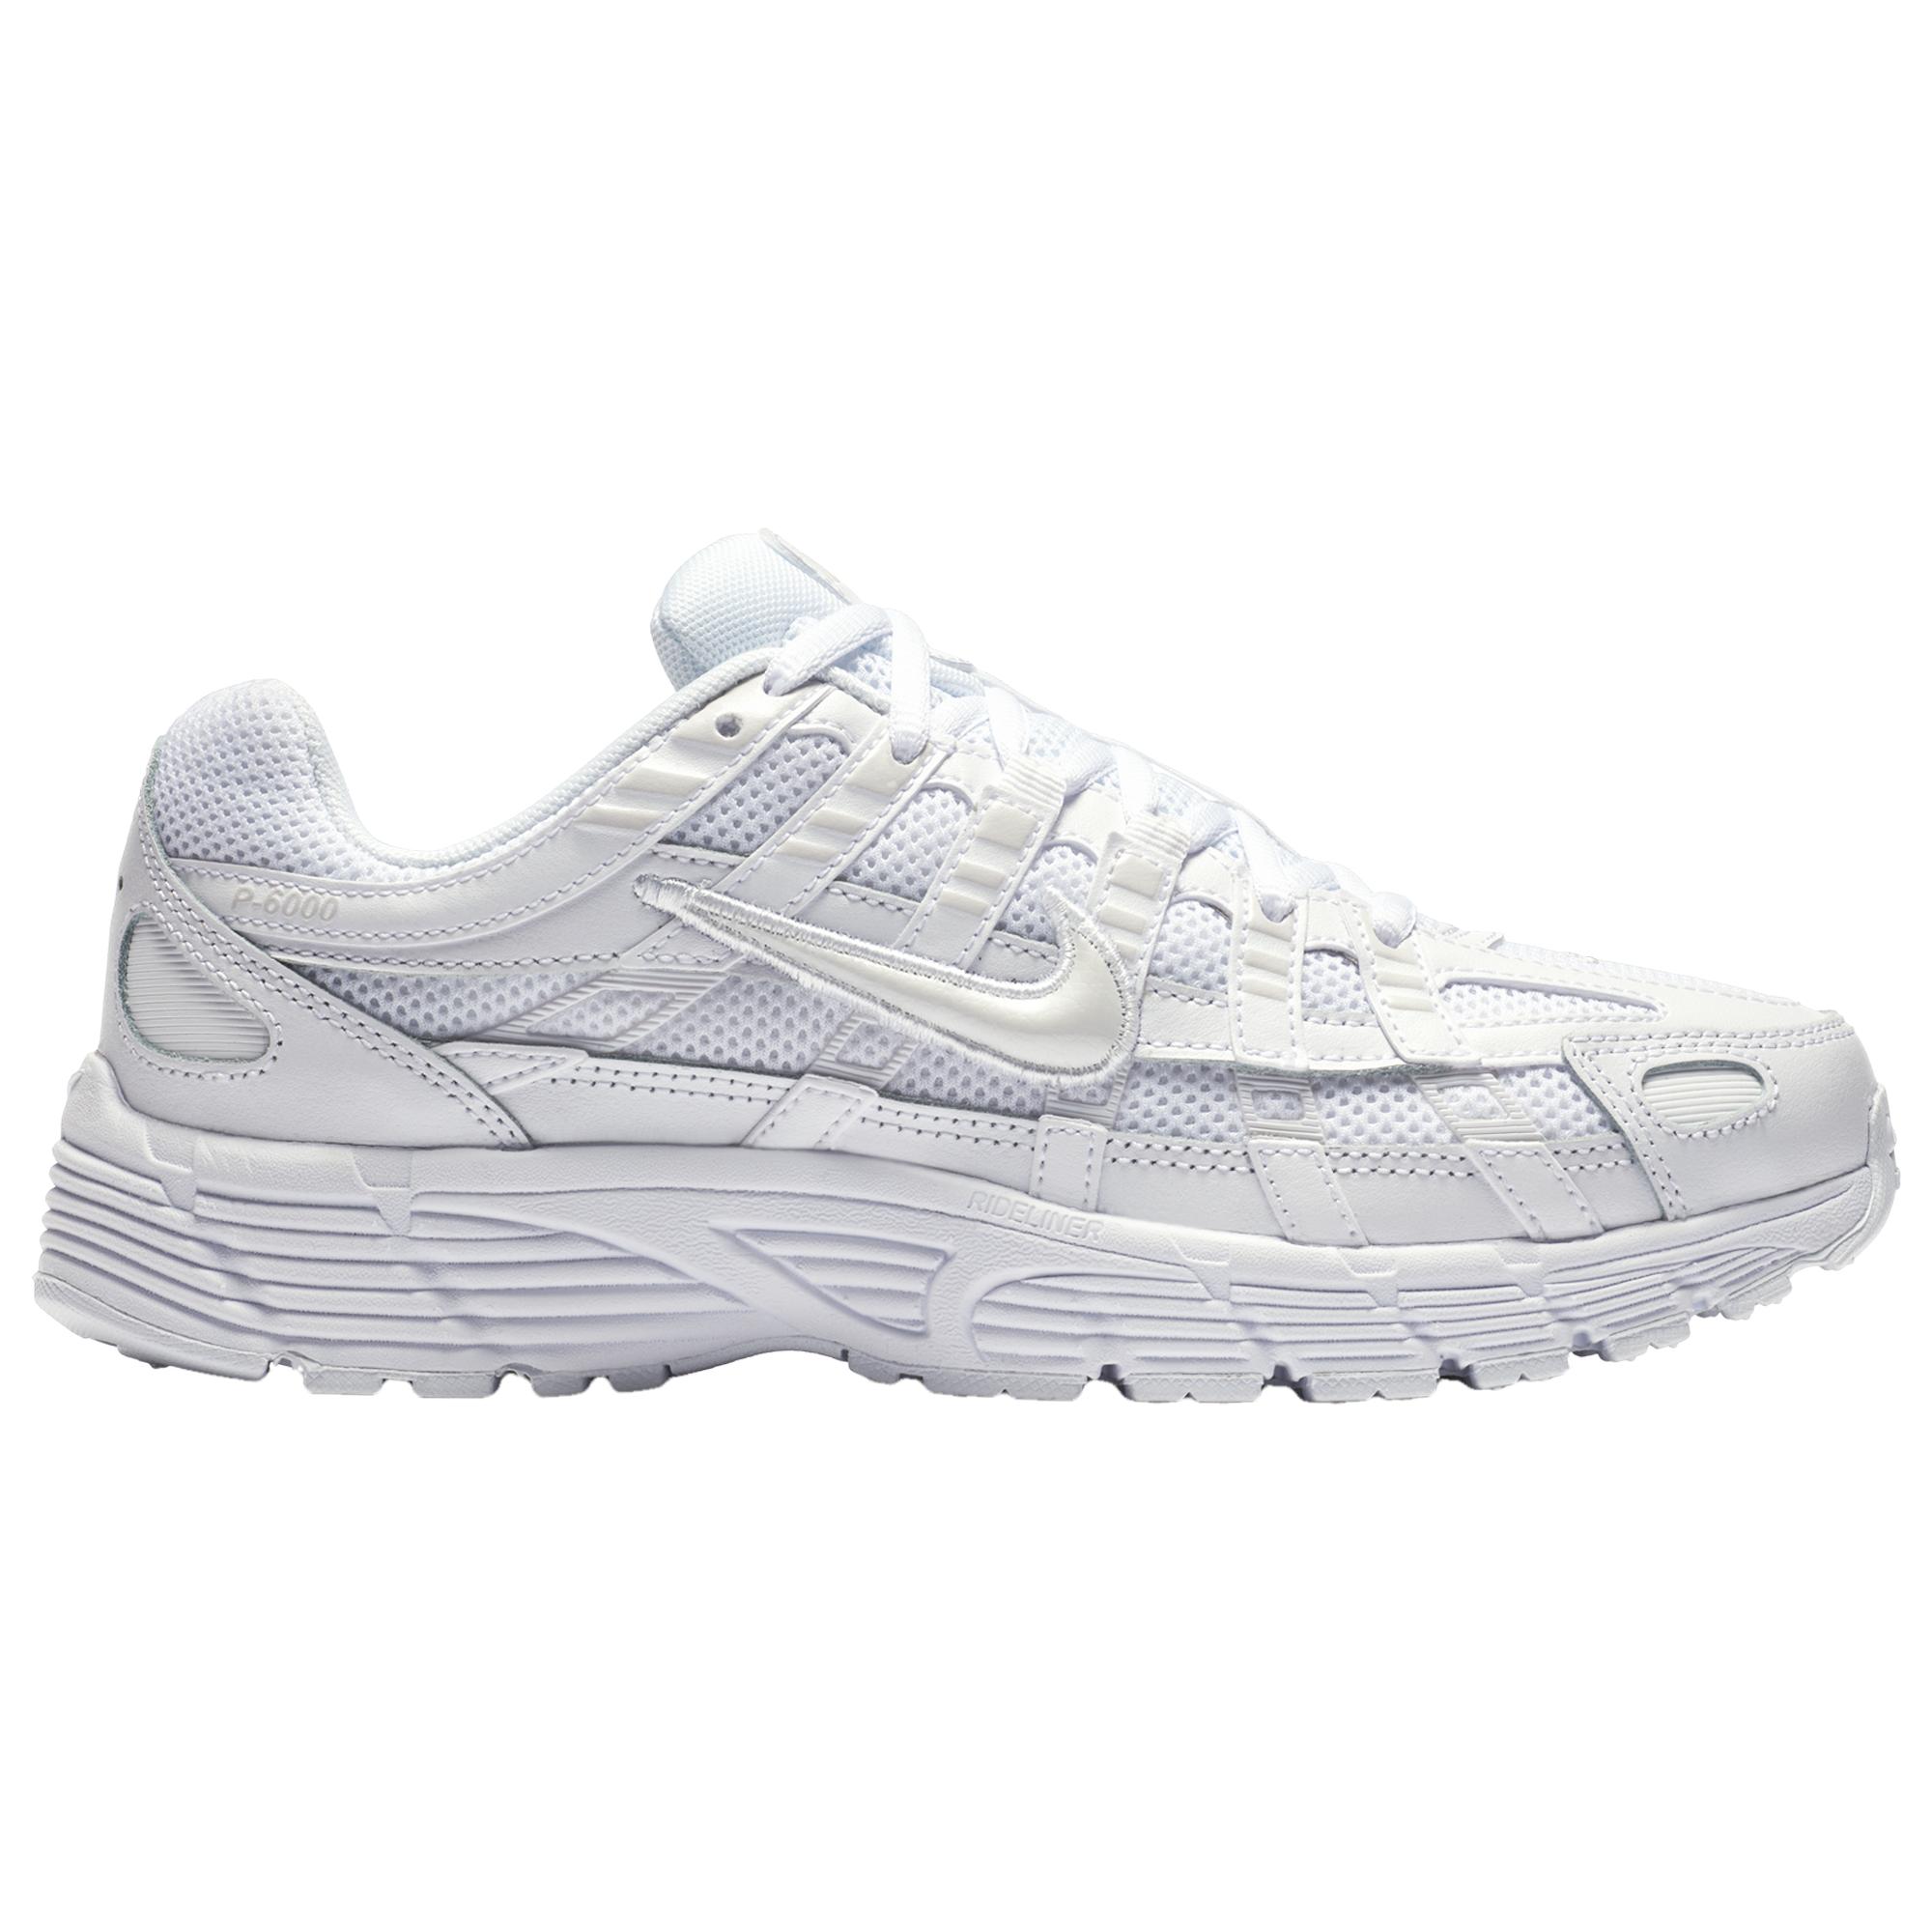 Nike Leather P-6000 in wh/wh (White) - Lyst